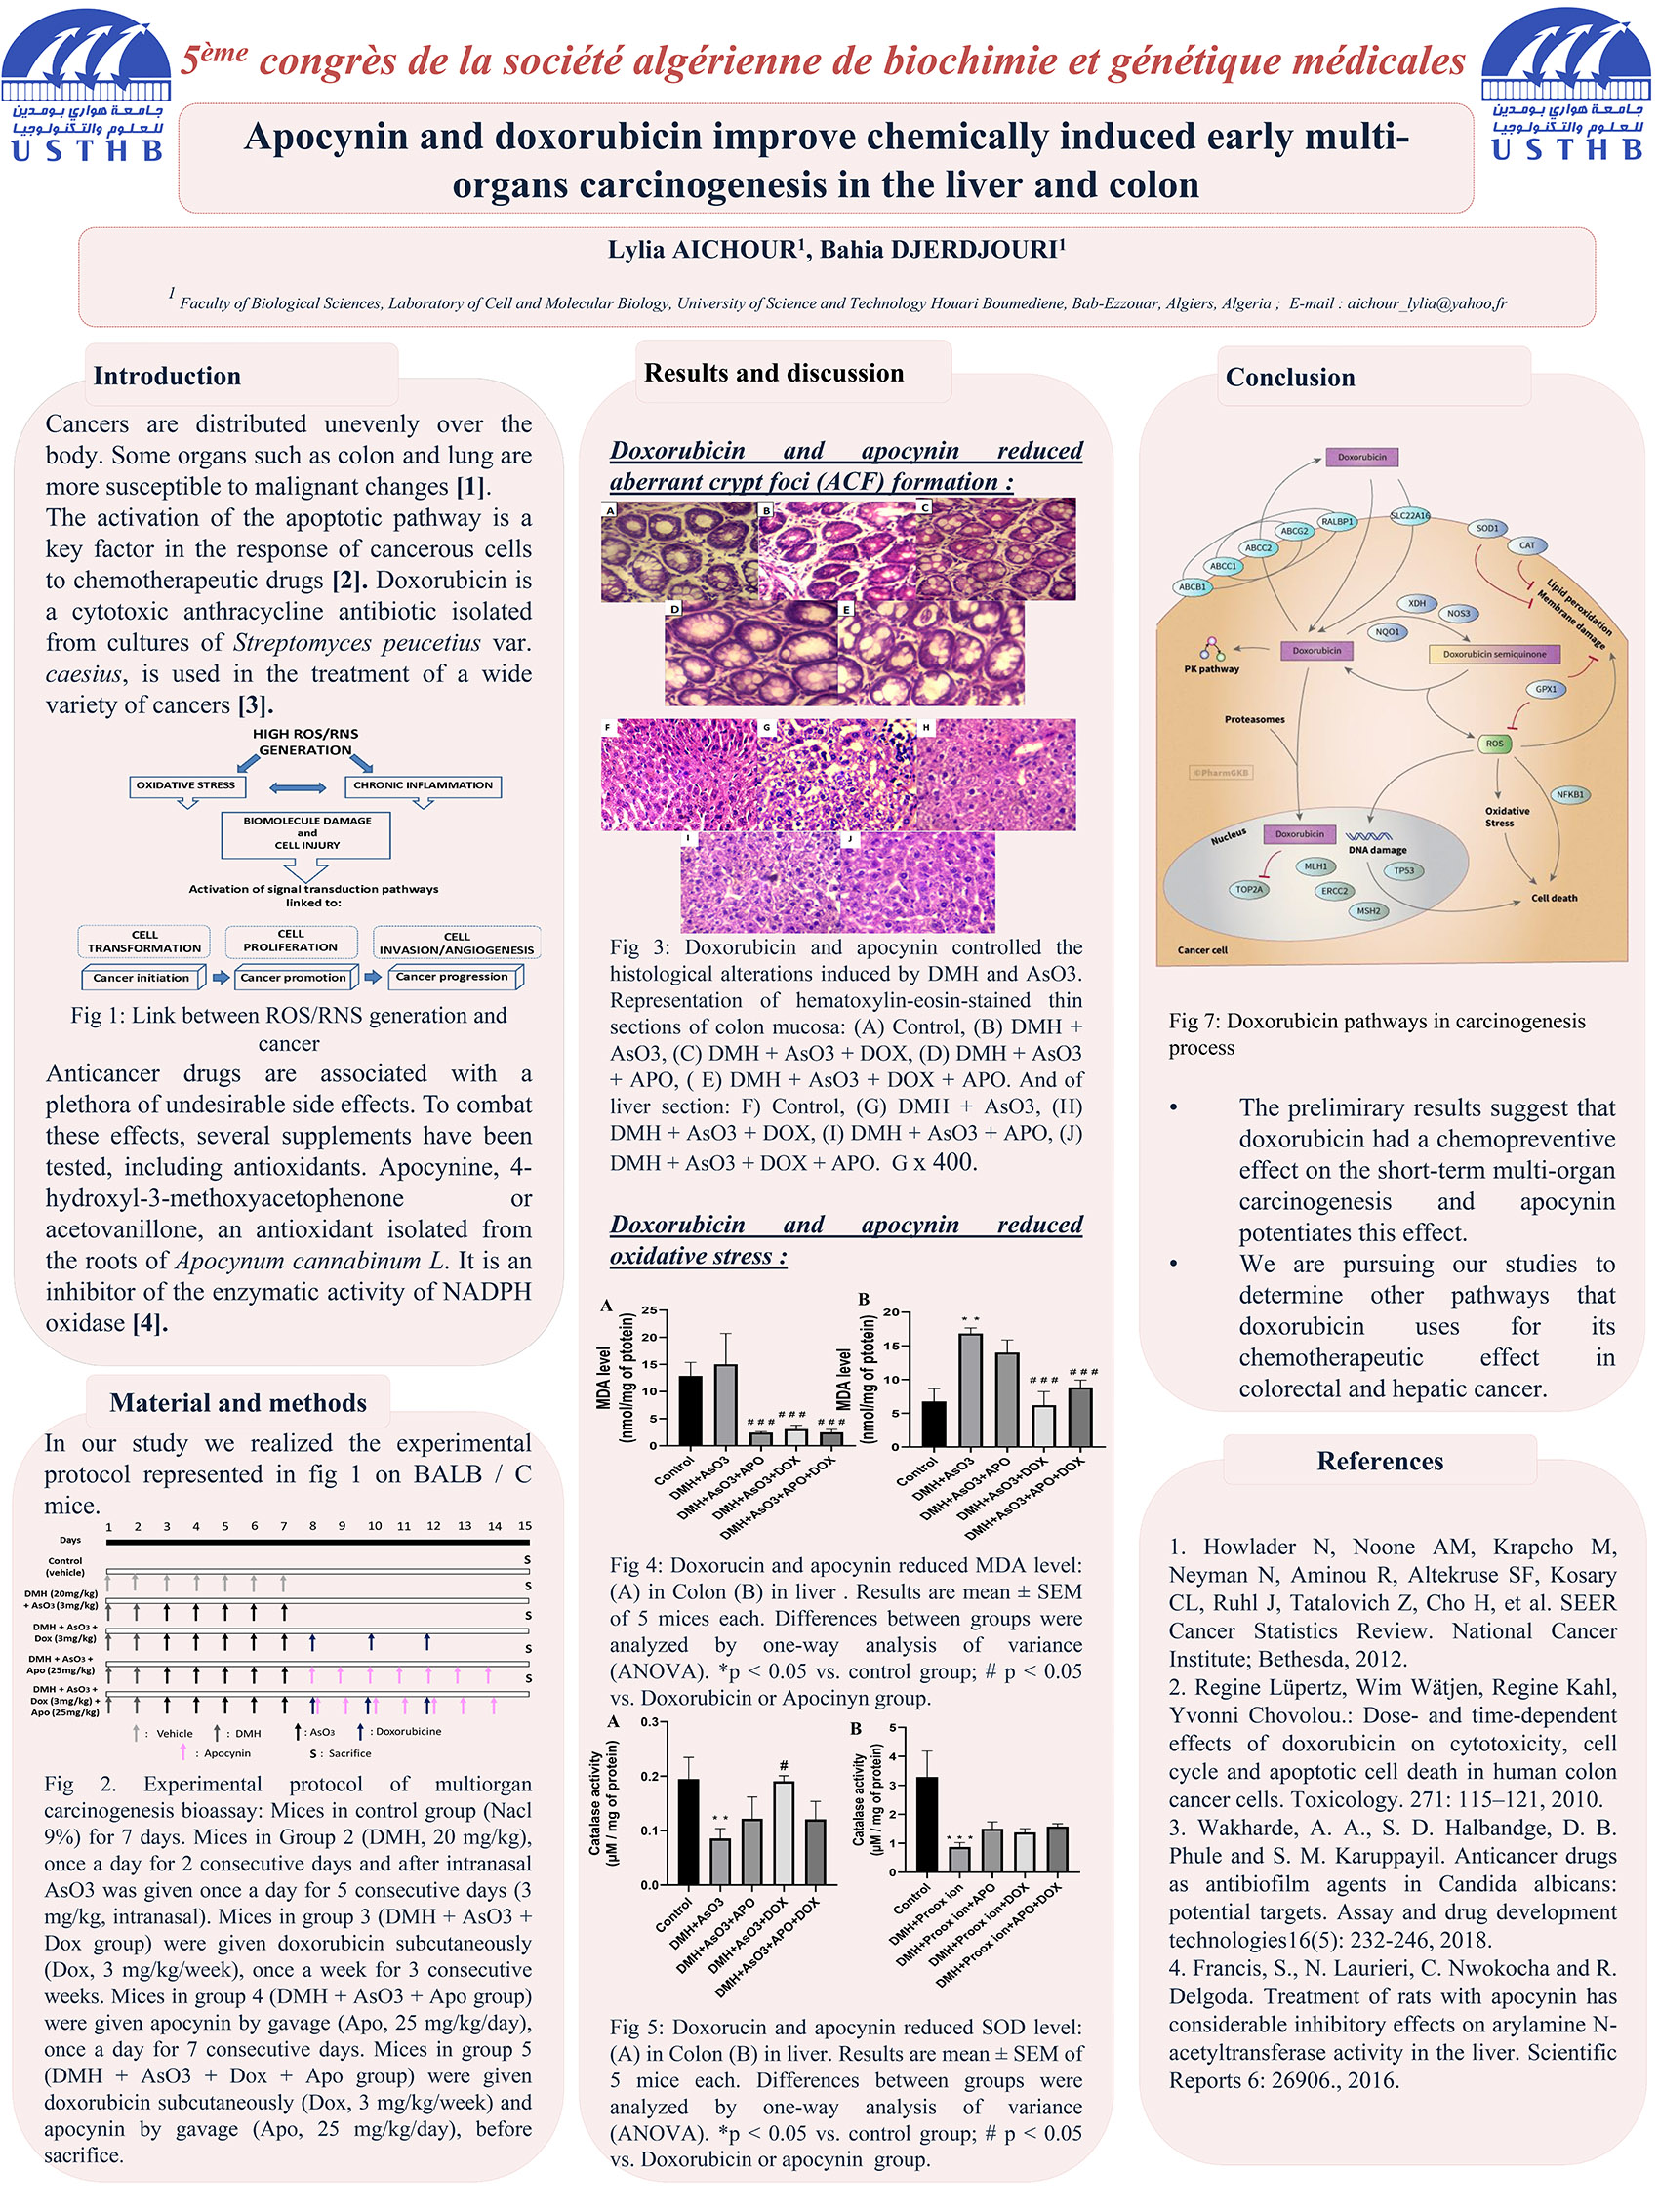 P57 : Apocynin and doxorubicin improve chemically induced early multiorgans carcinogenesis in the liver and colon